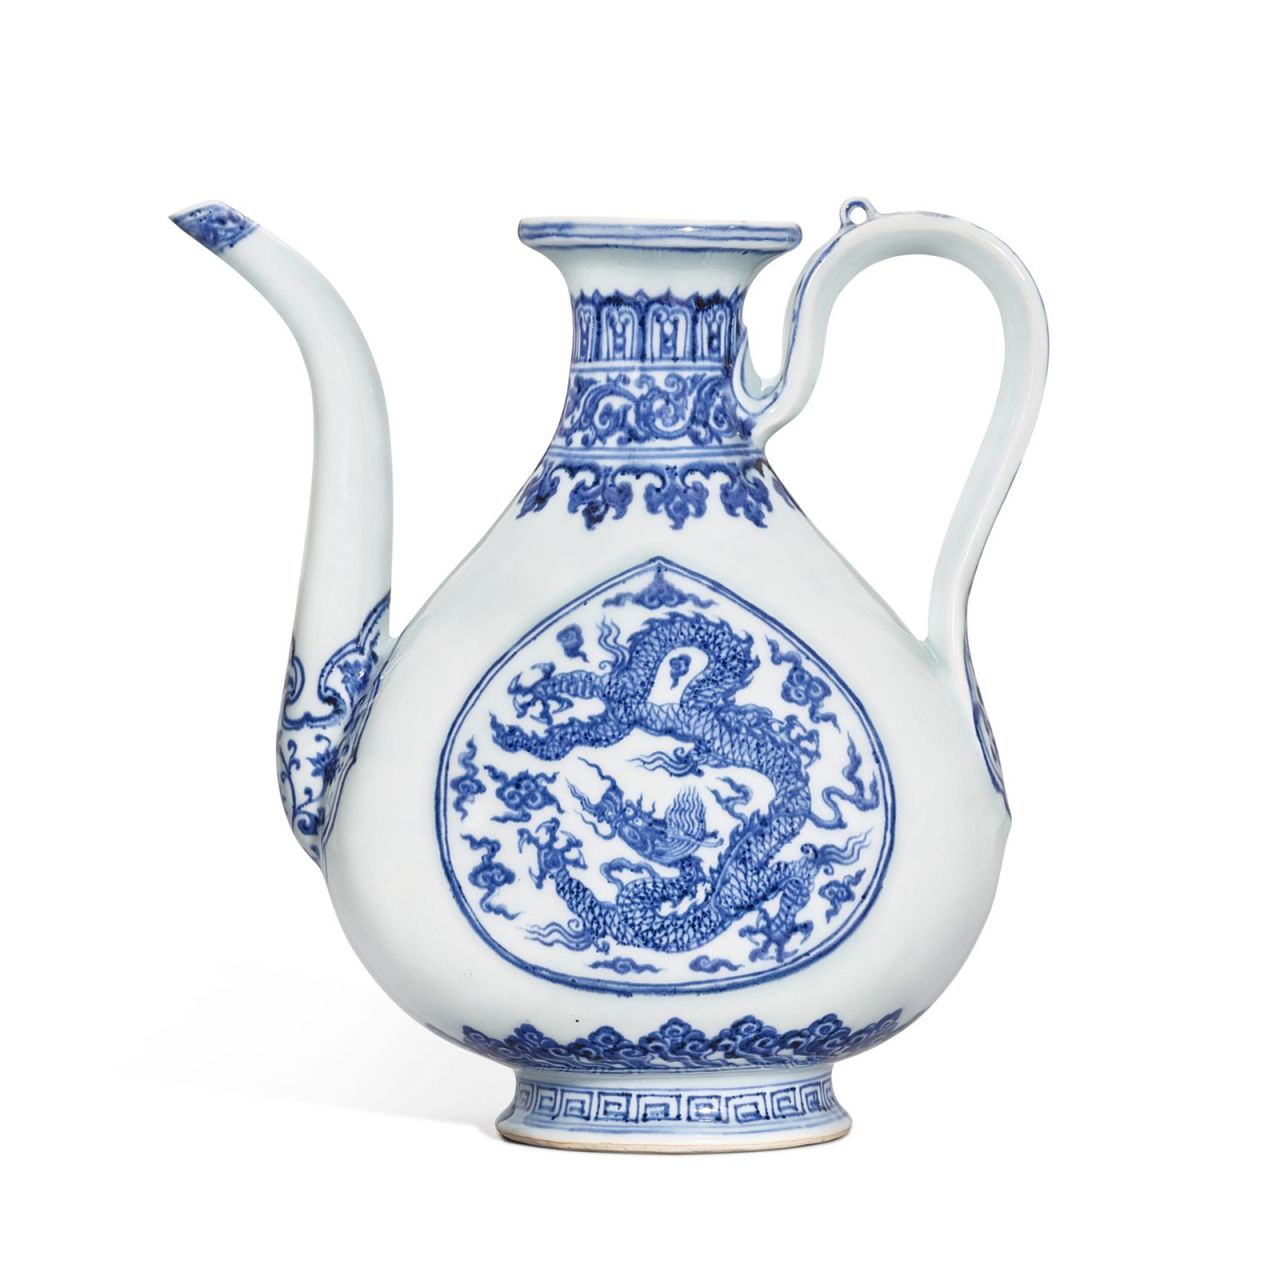 An imperial blue and white "Dragon" ewer, dating to the Ming Dynasty, sold for $13.7 million.